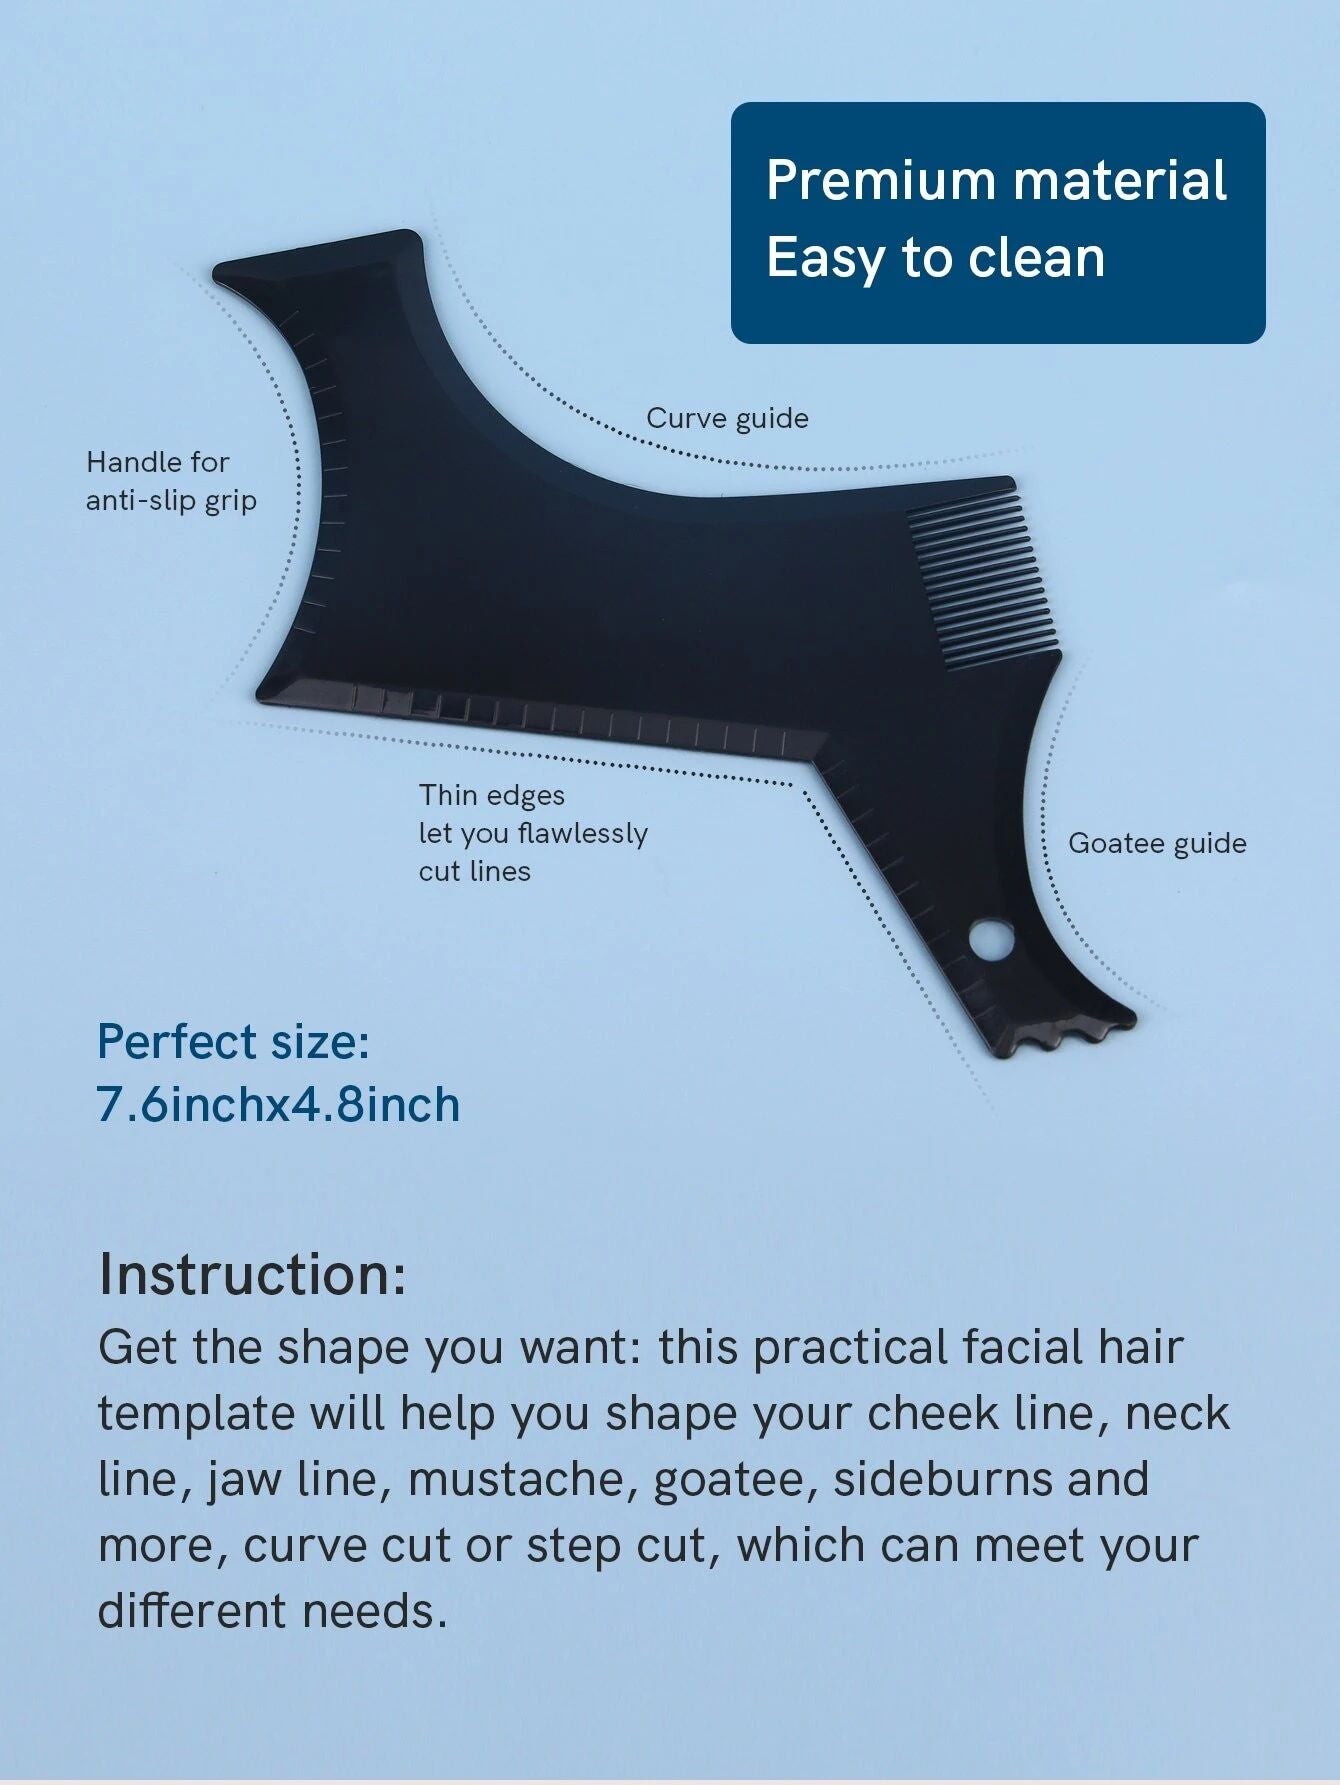 Beard styling tool, beard styling template for symmetrical curve trimming of chin, cheeks and neckline, can be used with a beard trimmer or razor